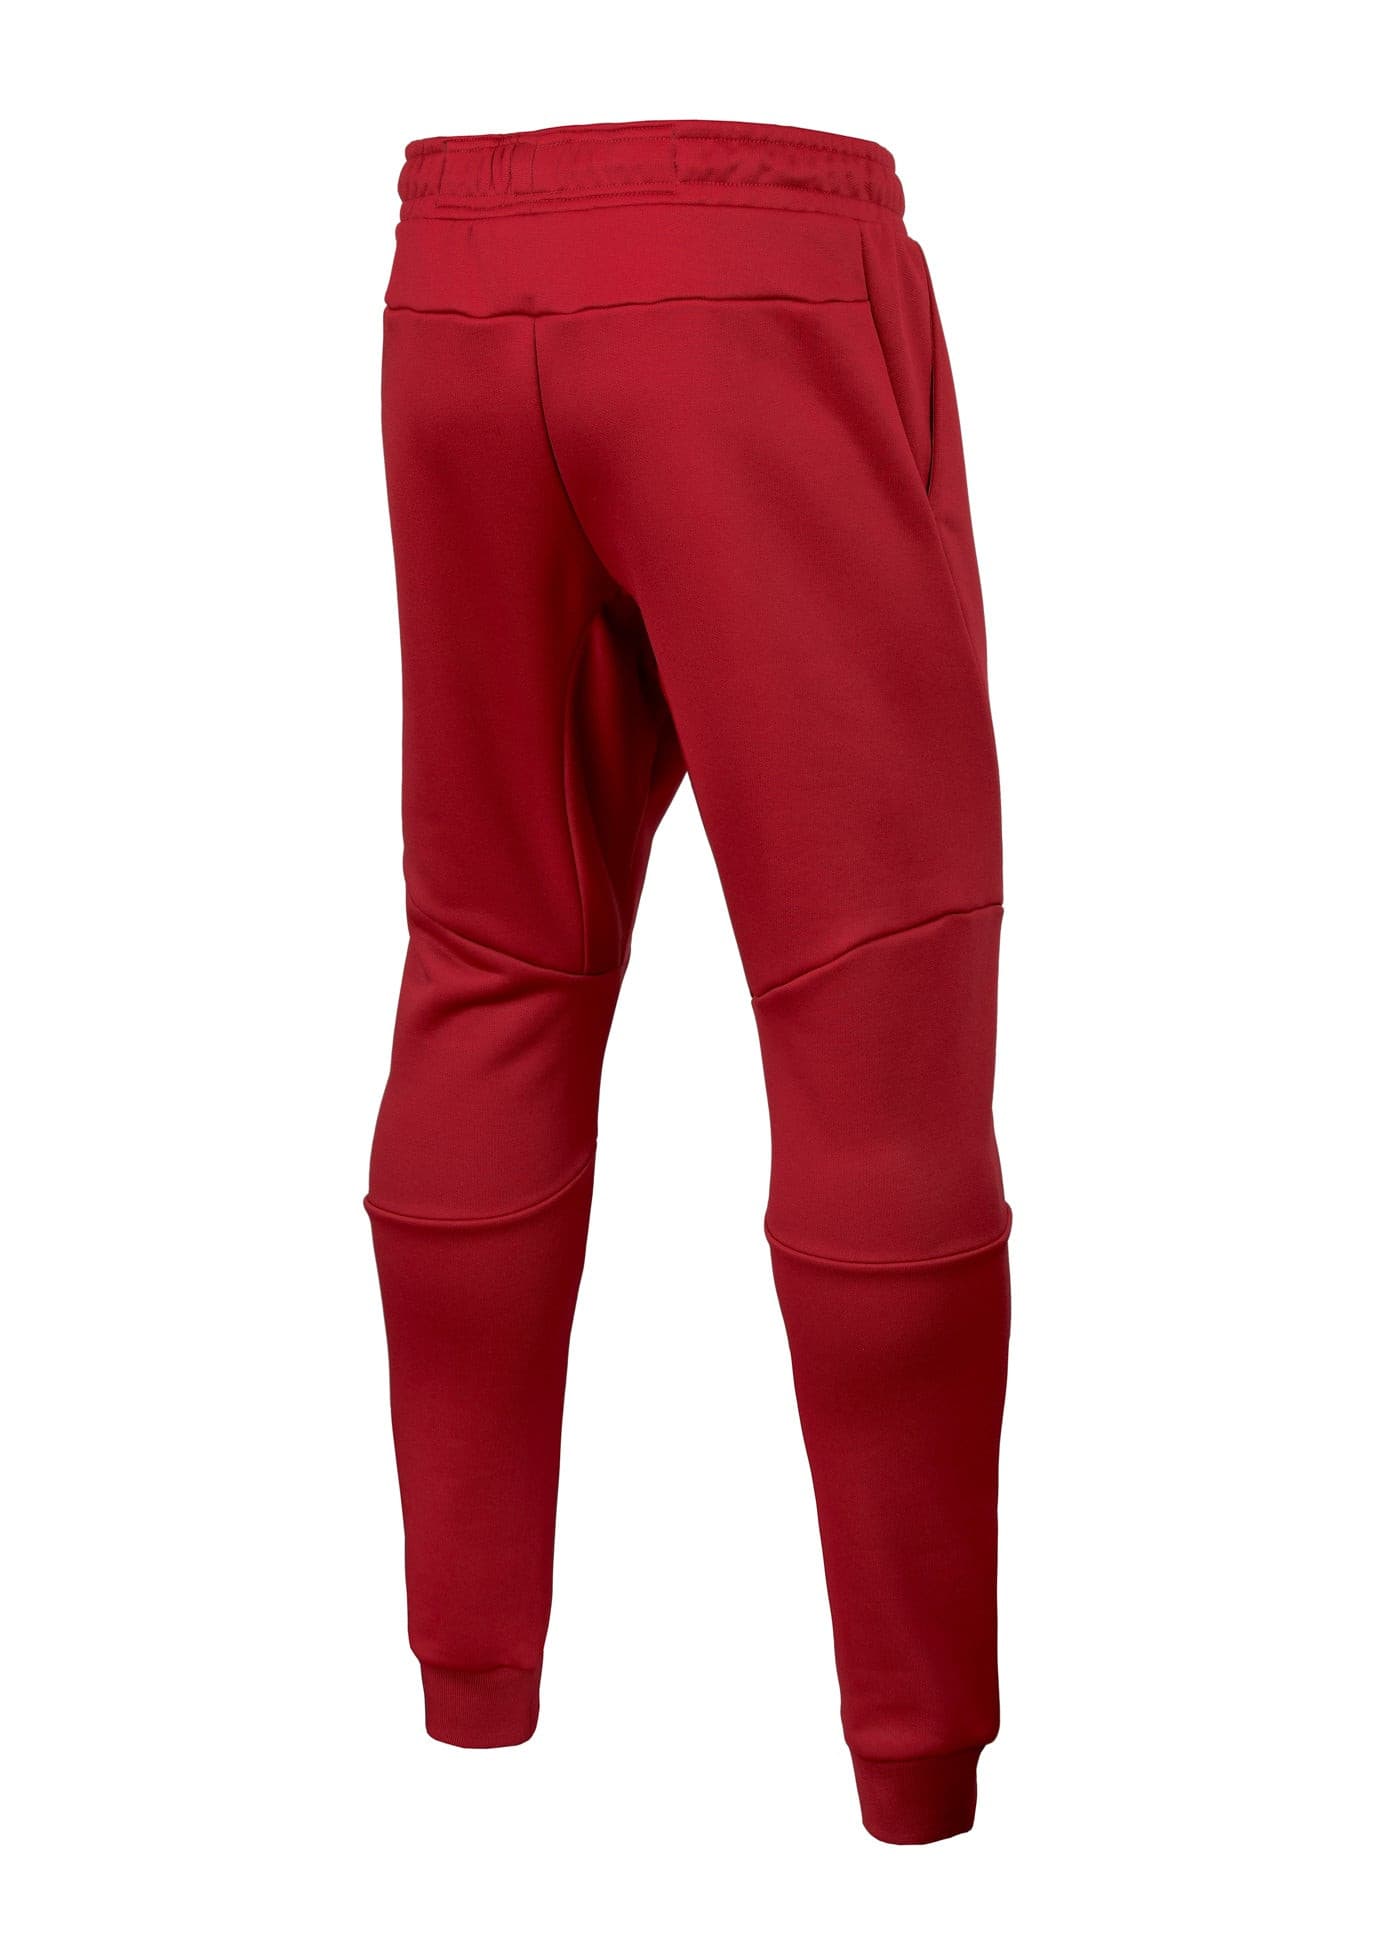 Buy OLD SCHOOL SMALL LOGO Red Track Pants | Pitbull